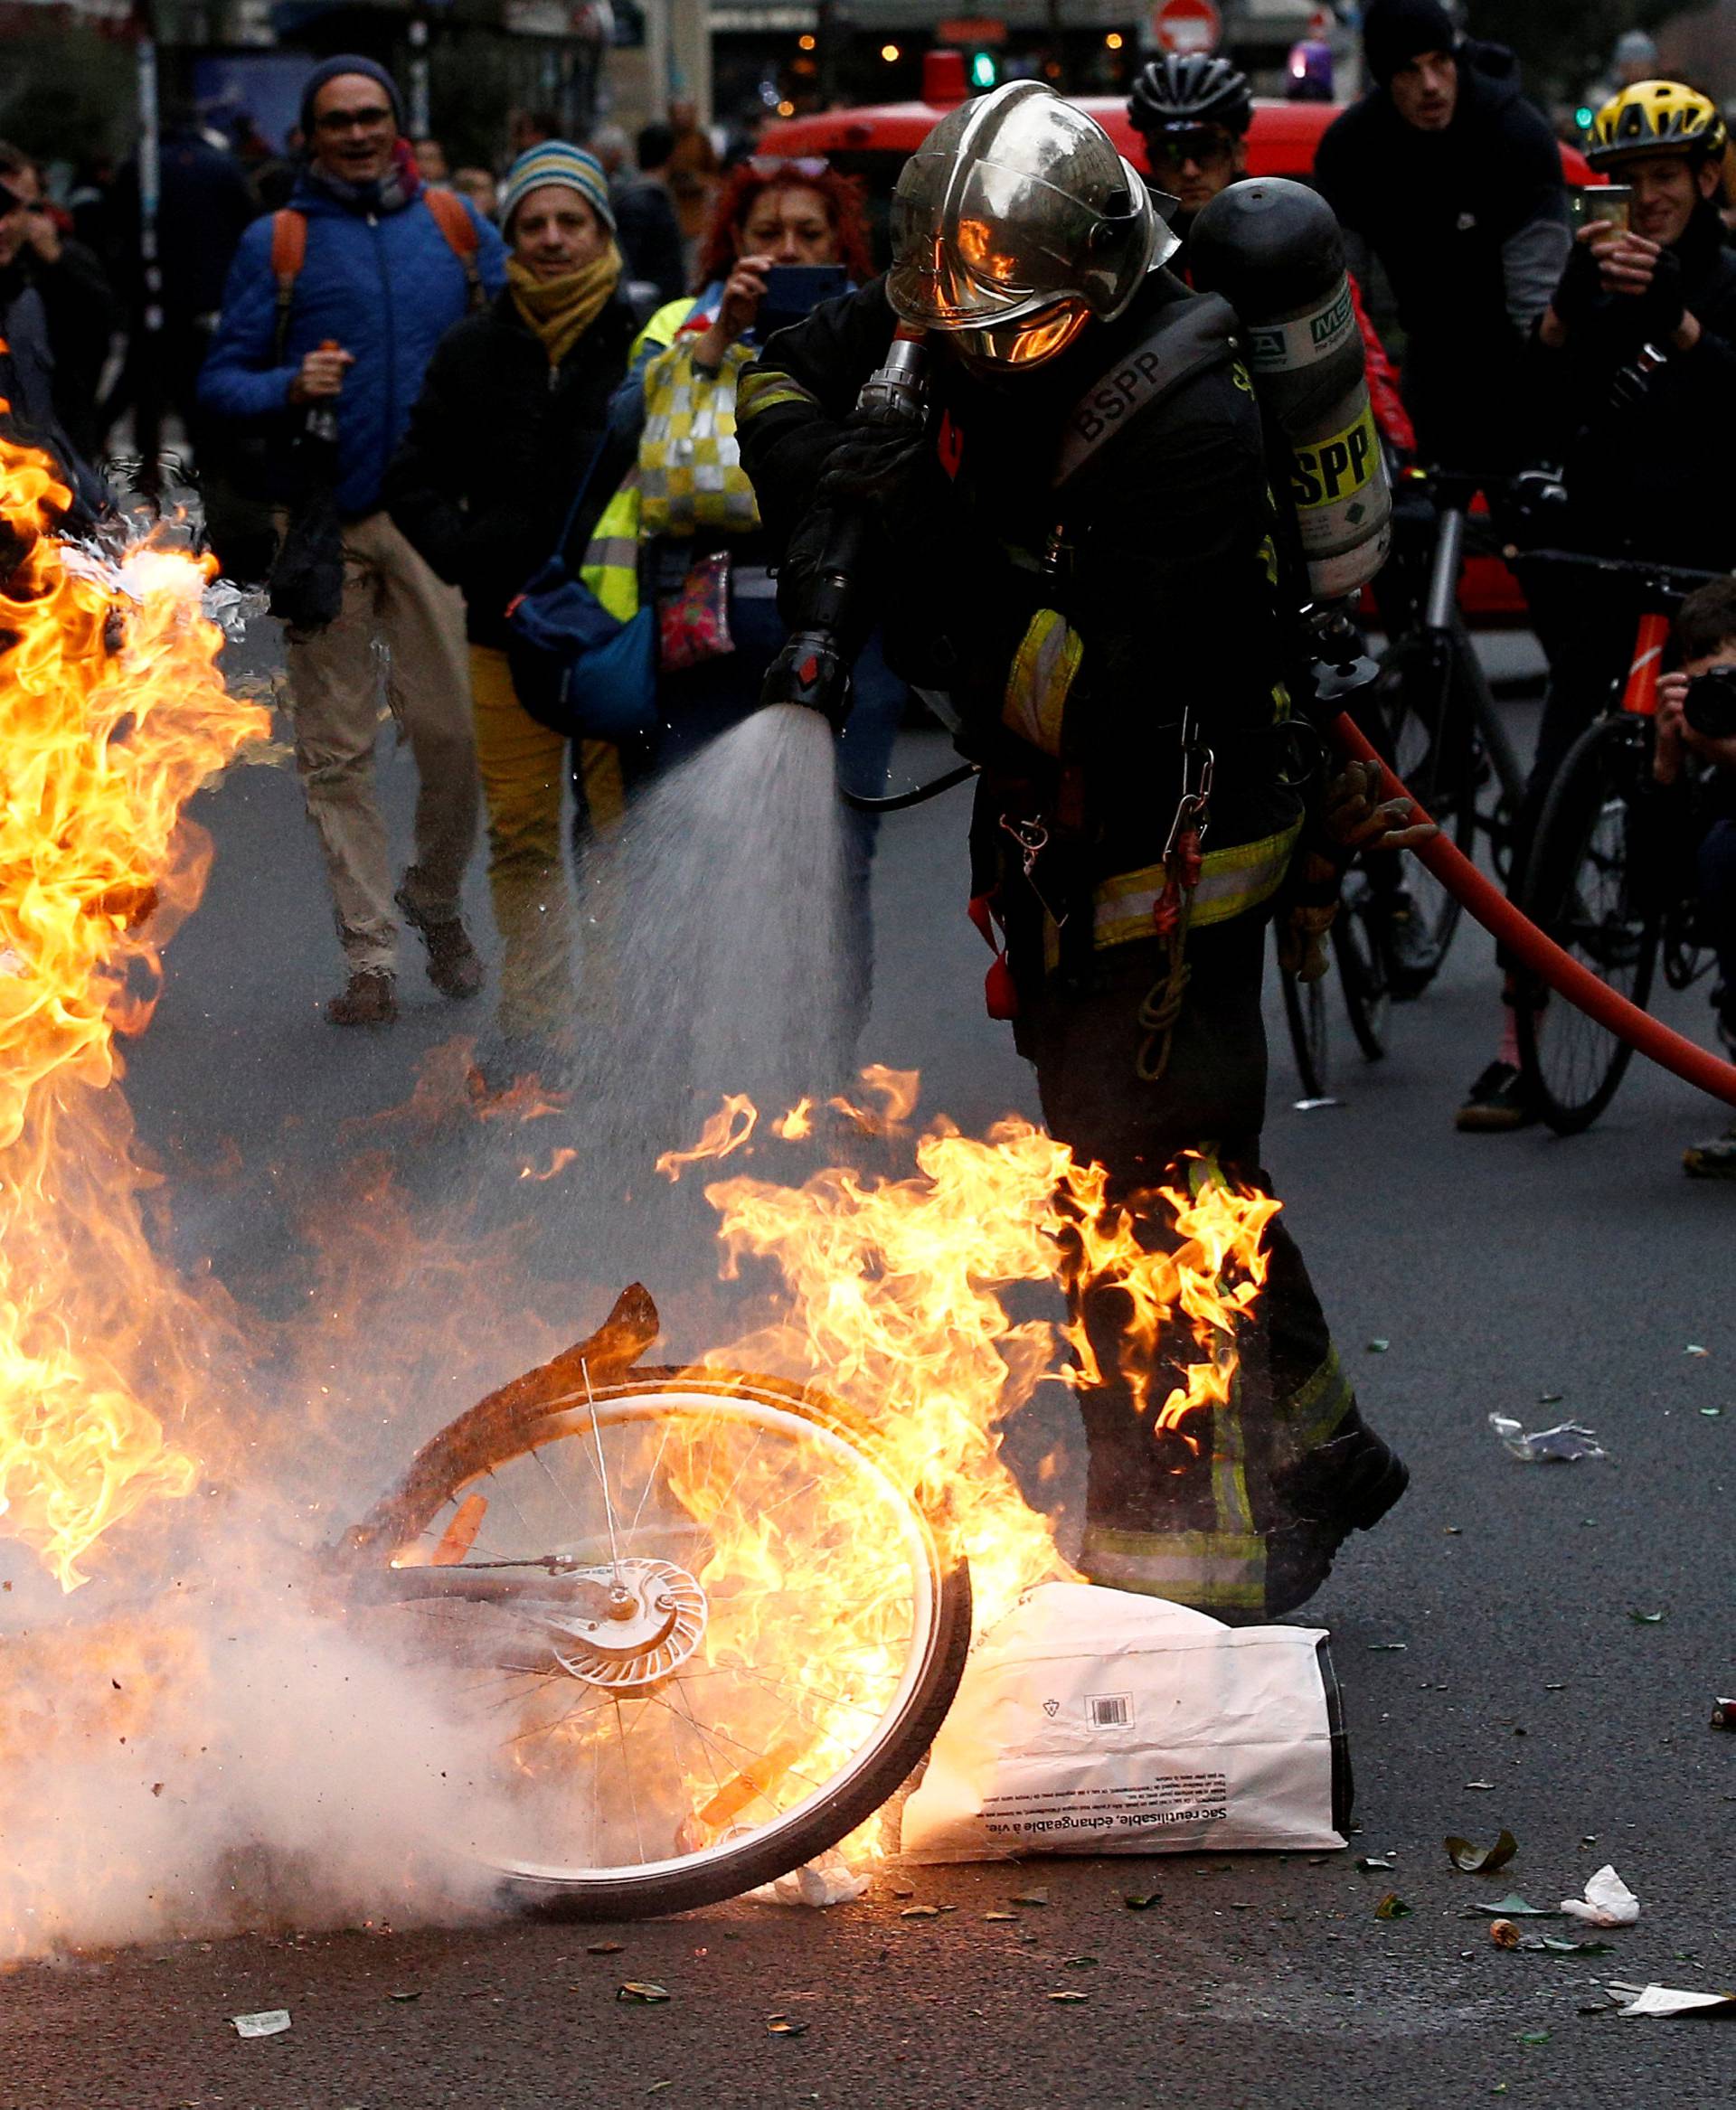 A fireman extinguishes a burning bicycle during clashes with yellow vests protesters as part of a national day of protest by the "yellow vests" movement in Paris